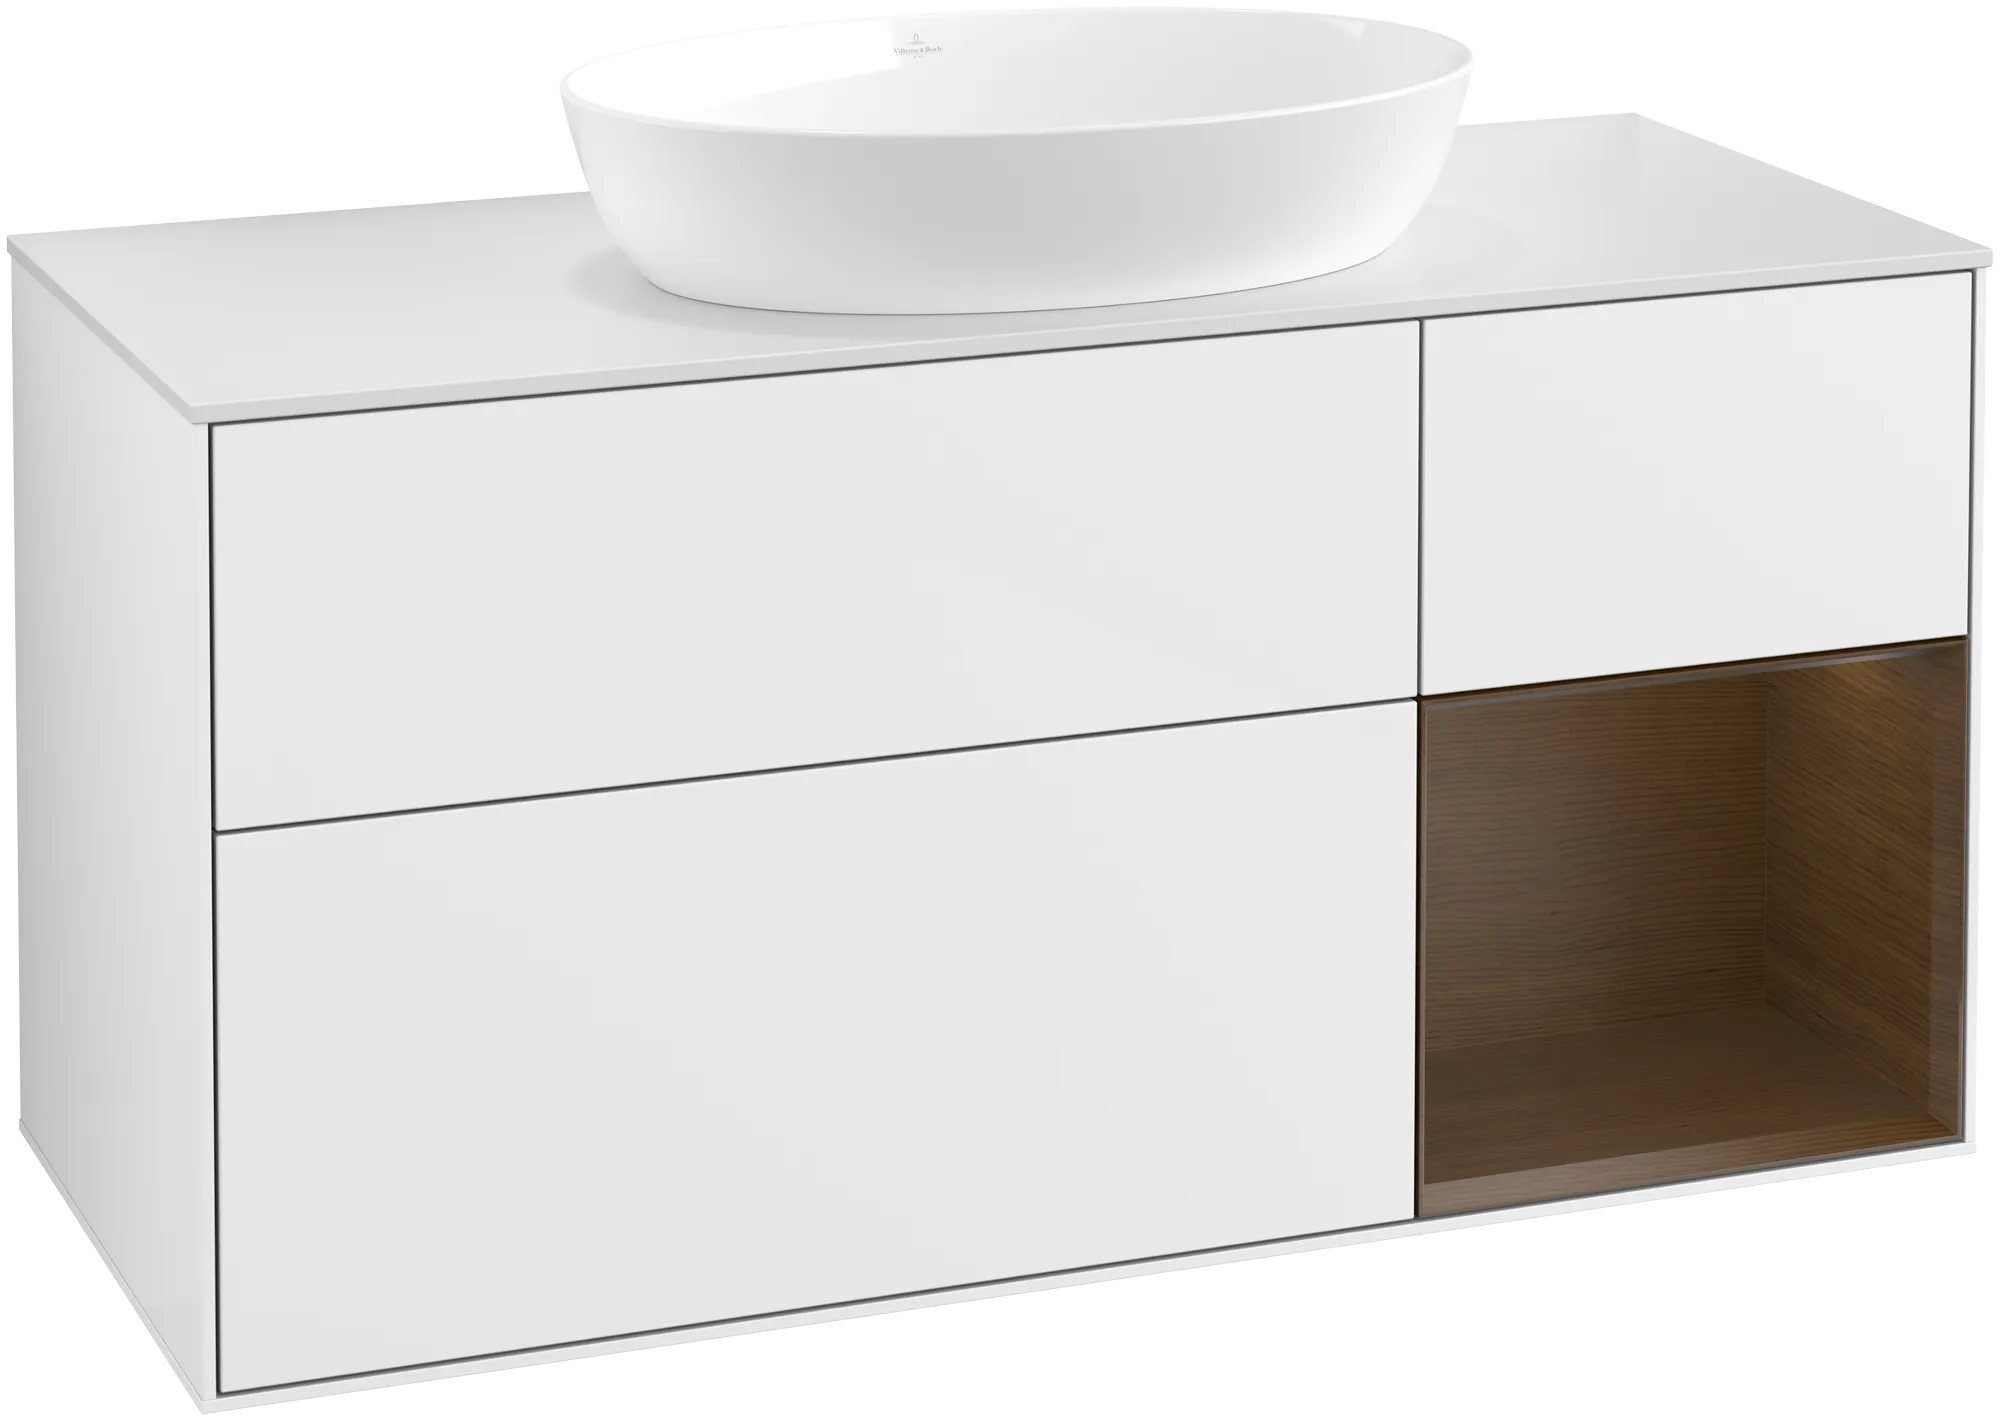 Obrázek VILLEROY BOCH Finion Vanity unit, with lighting, 3 pull-out compartments, 1200 x 603 x 501 mm, Glossy White Lacquer / Walnut Veneer / Glass White Matt #FA71GNGF